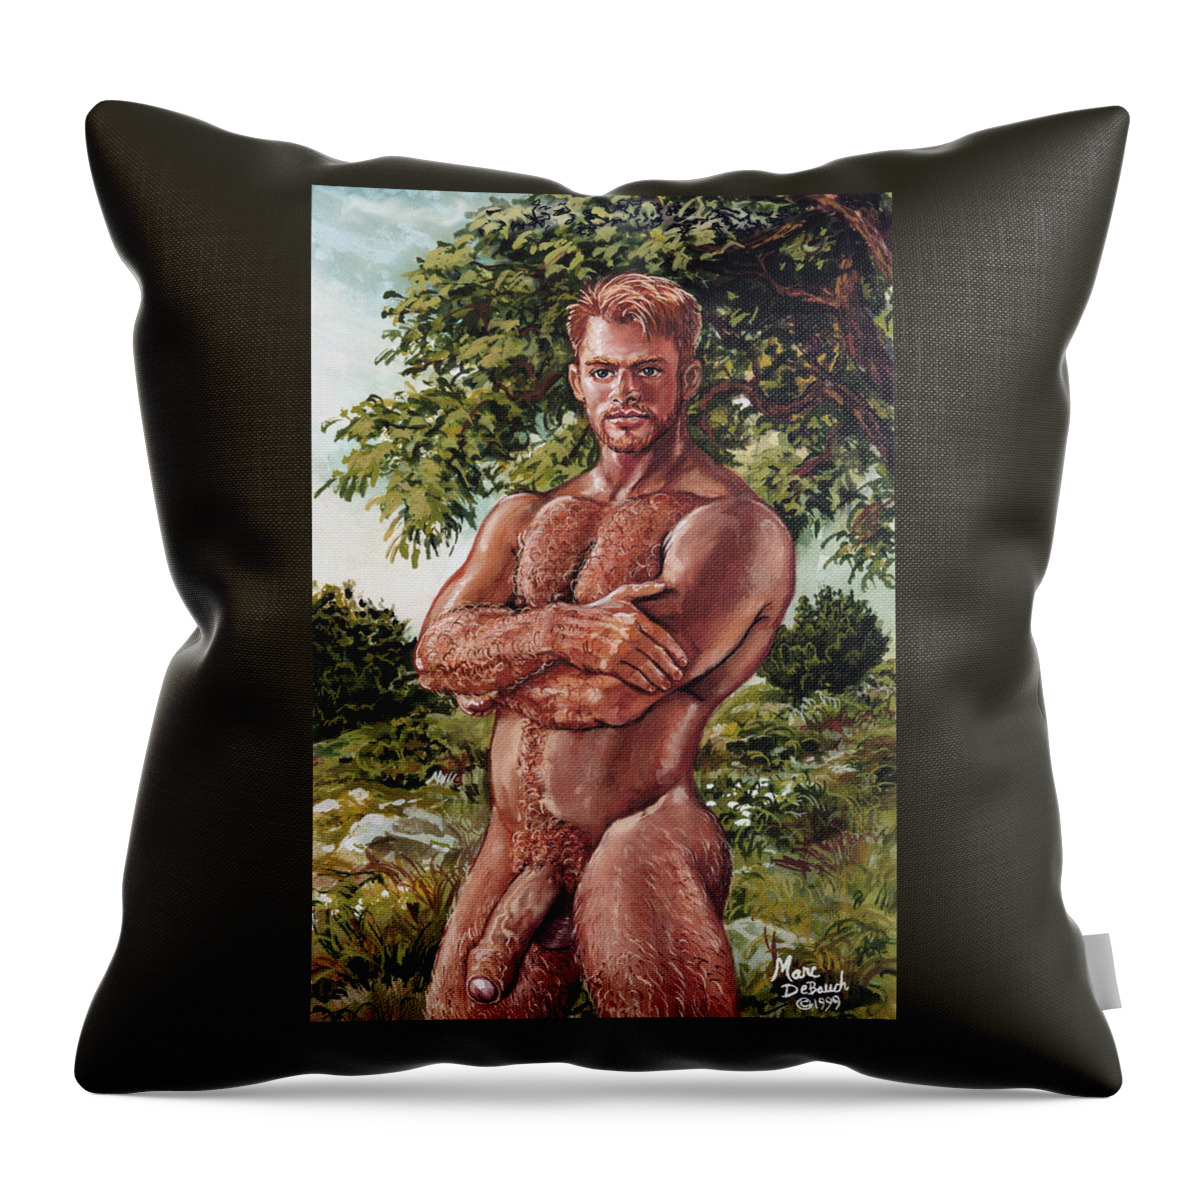 Muscle Throw Pillow featuring the painting Big Red by Marc DeBauch